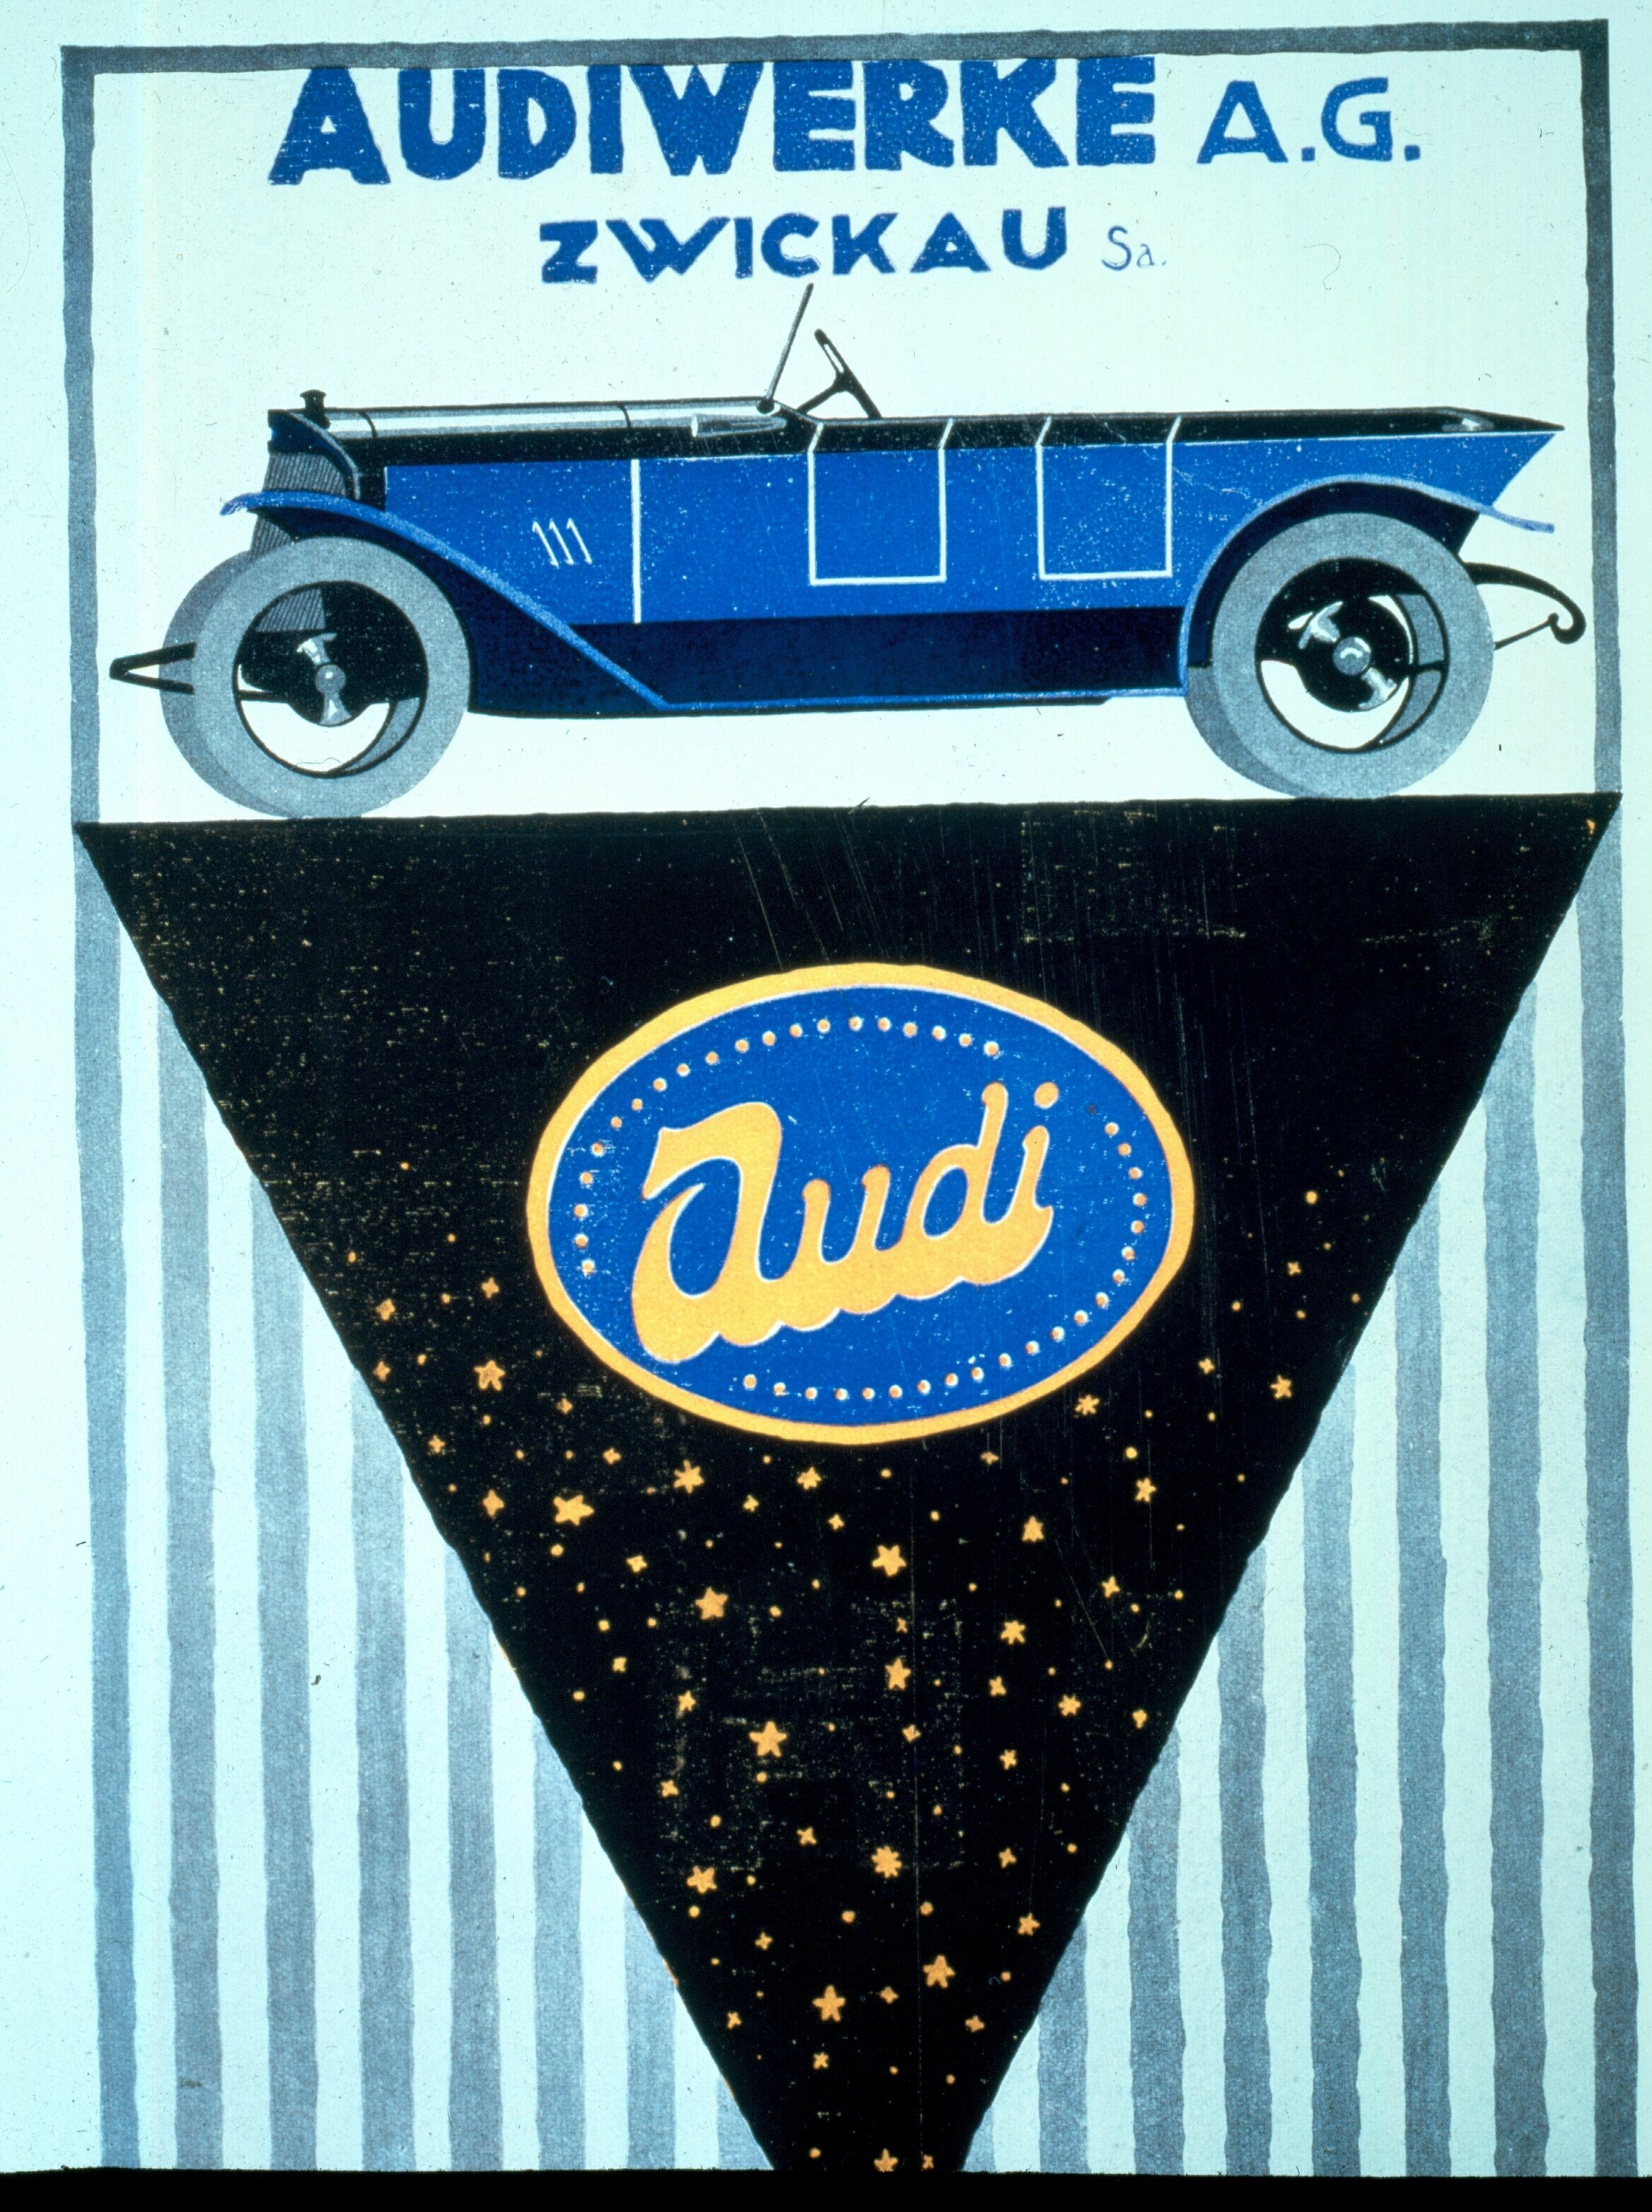 “Audi, 1909 to 1940 – the cars, the brand, the company”